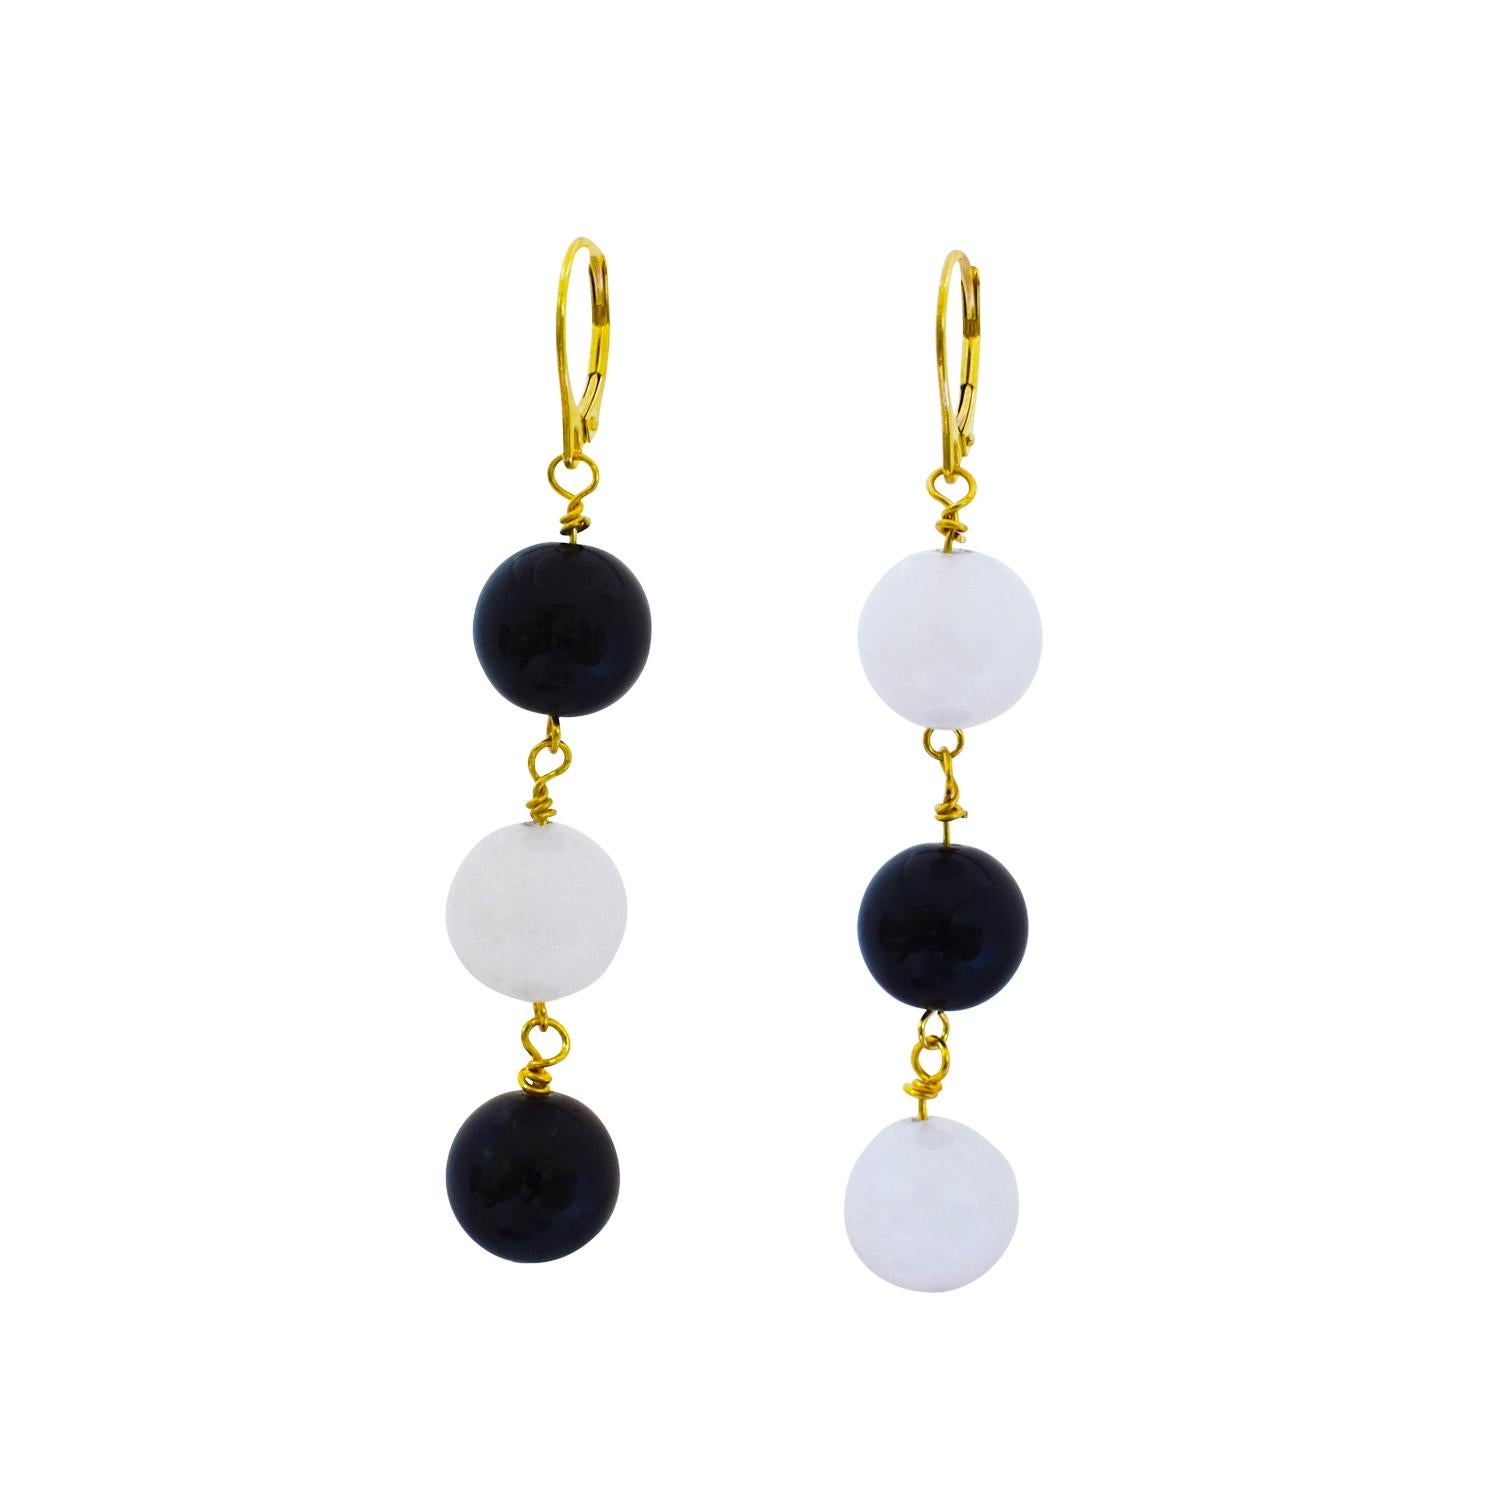 No story on colour is complete without black and white. Solid onyx and white agate are placed to form opposing views. Black and white are nature's greatest creations they are our benchmarks for understanding all of colour and all of